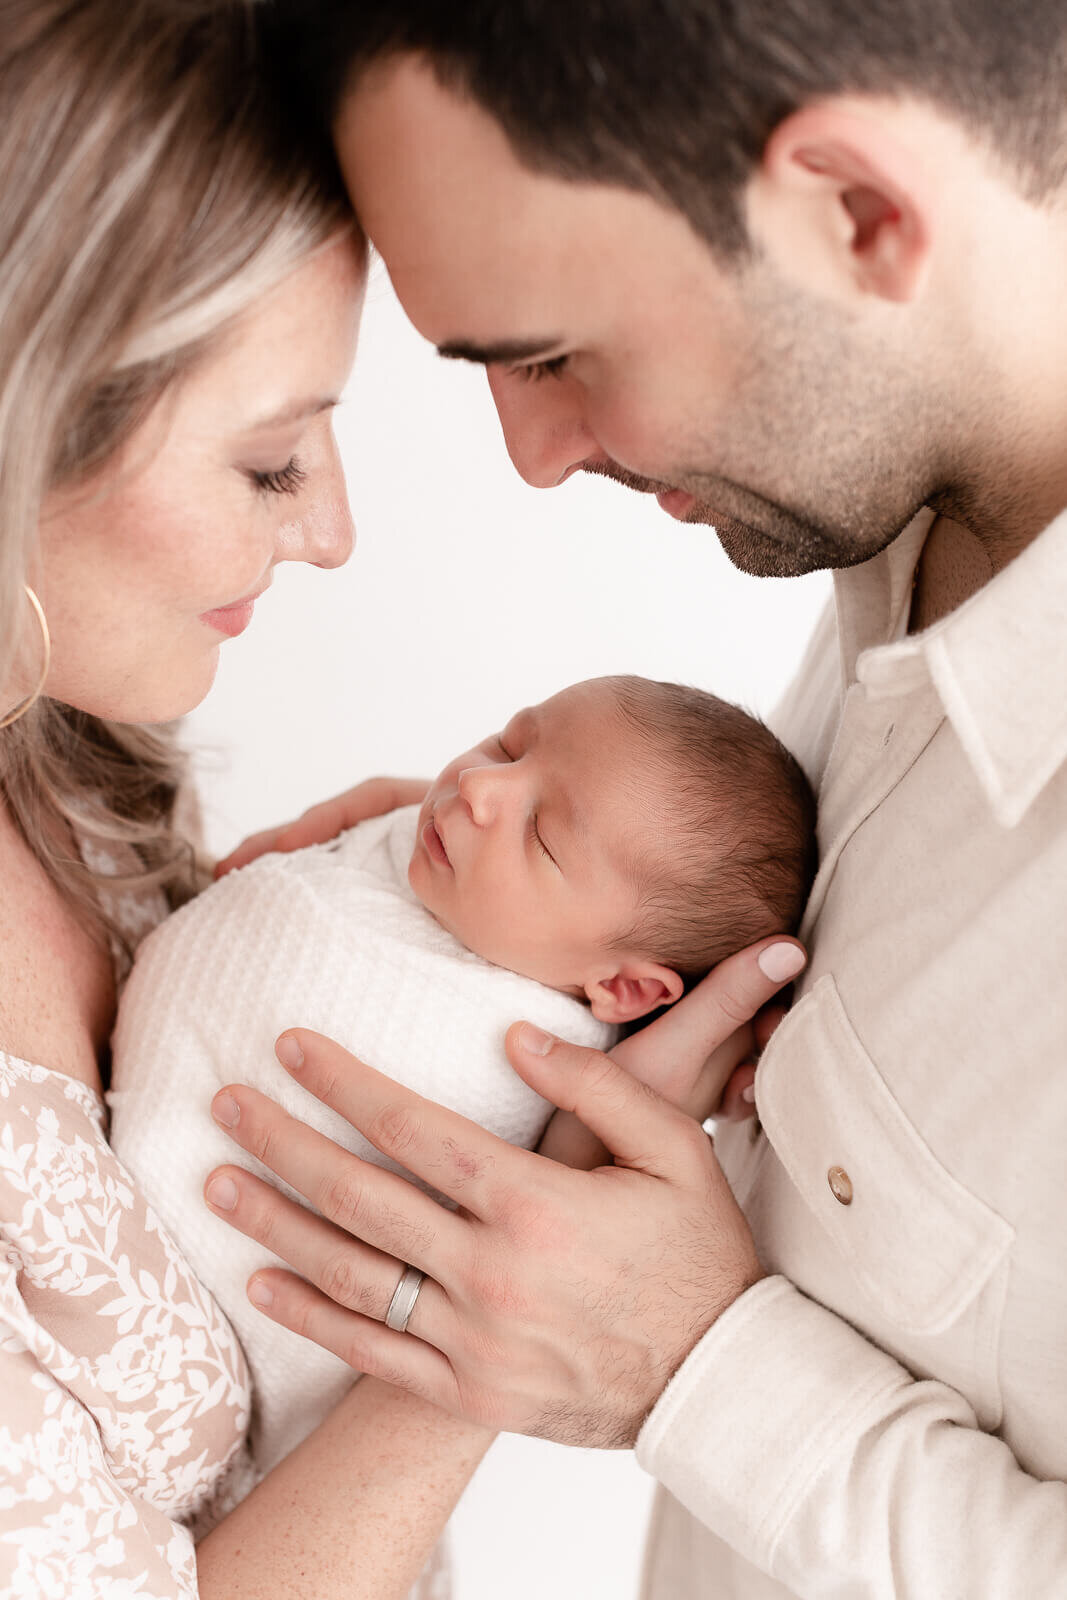 New Mom and Dad standing face to face and touching foreheads while holding their baby in between them. They are both smiling down at their baby while baby sleeps peacefully.